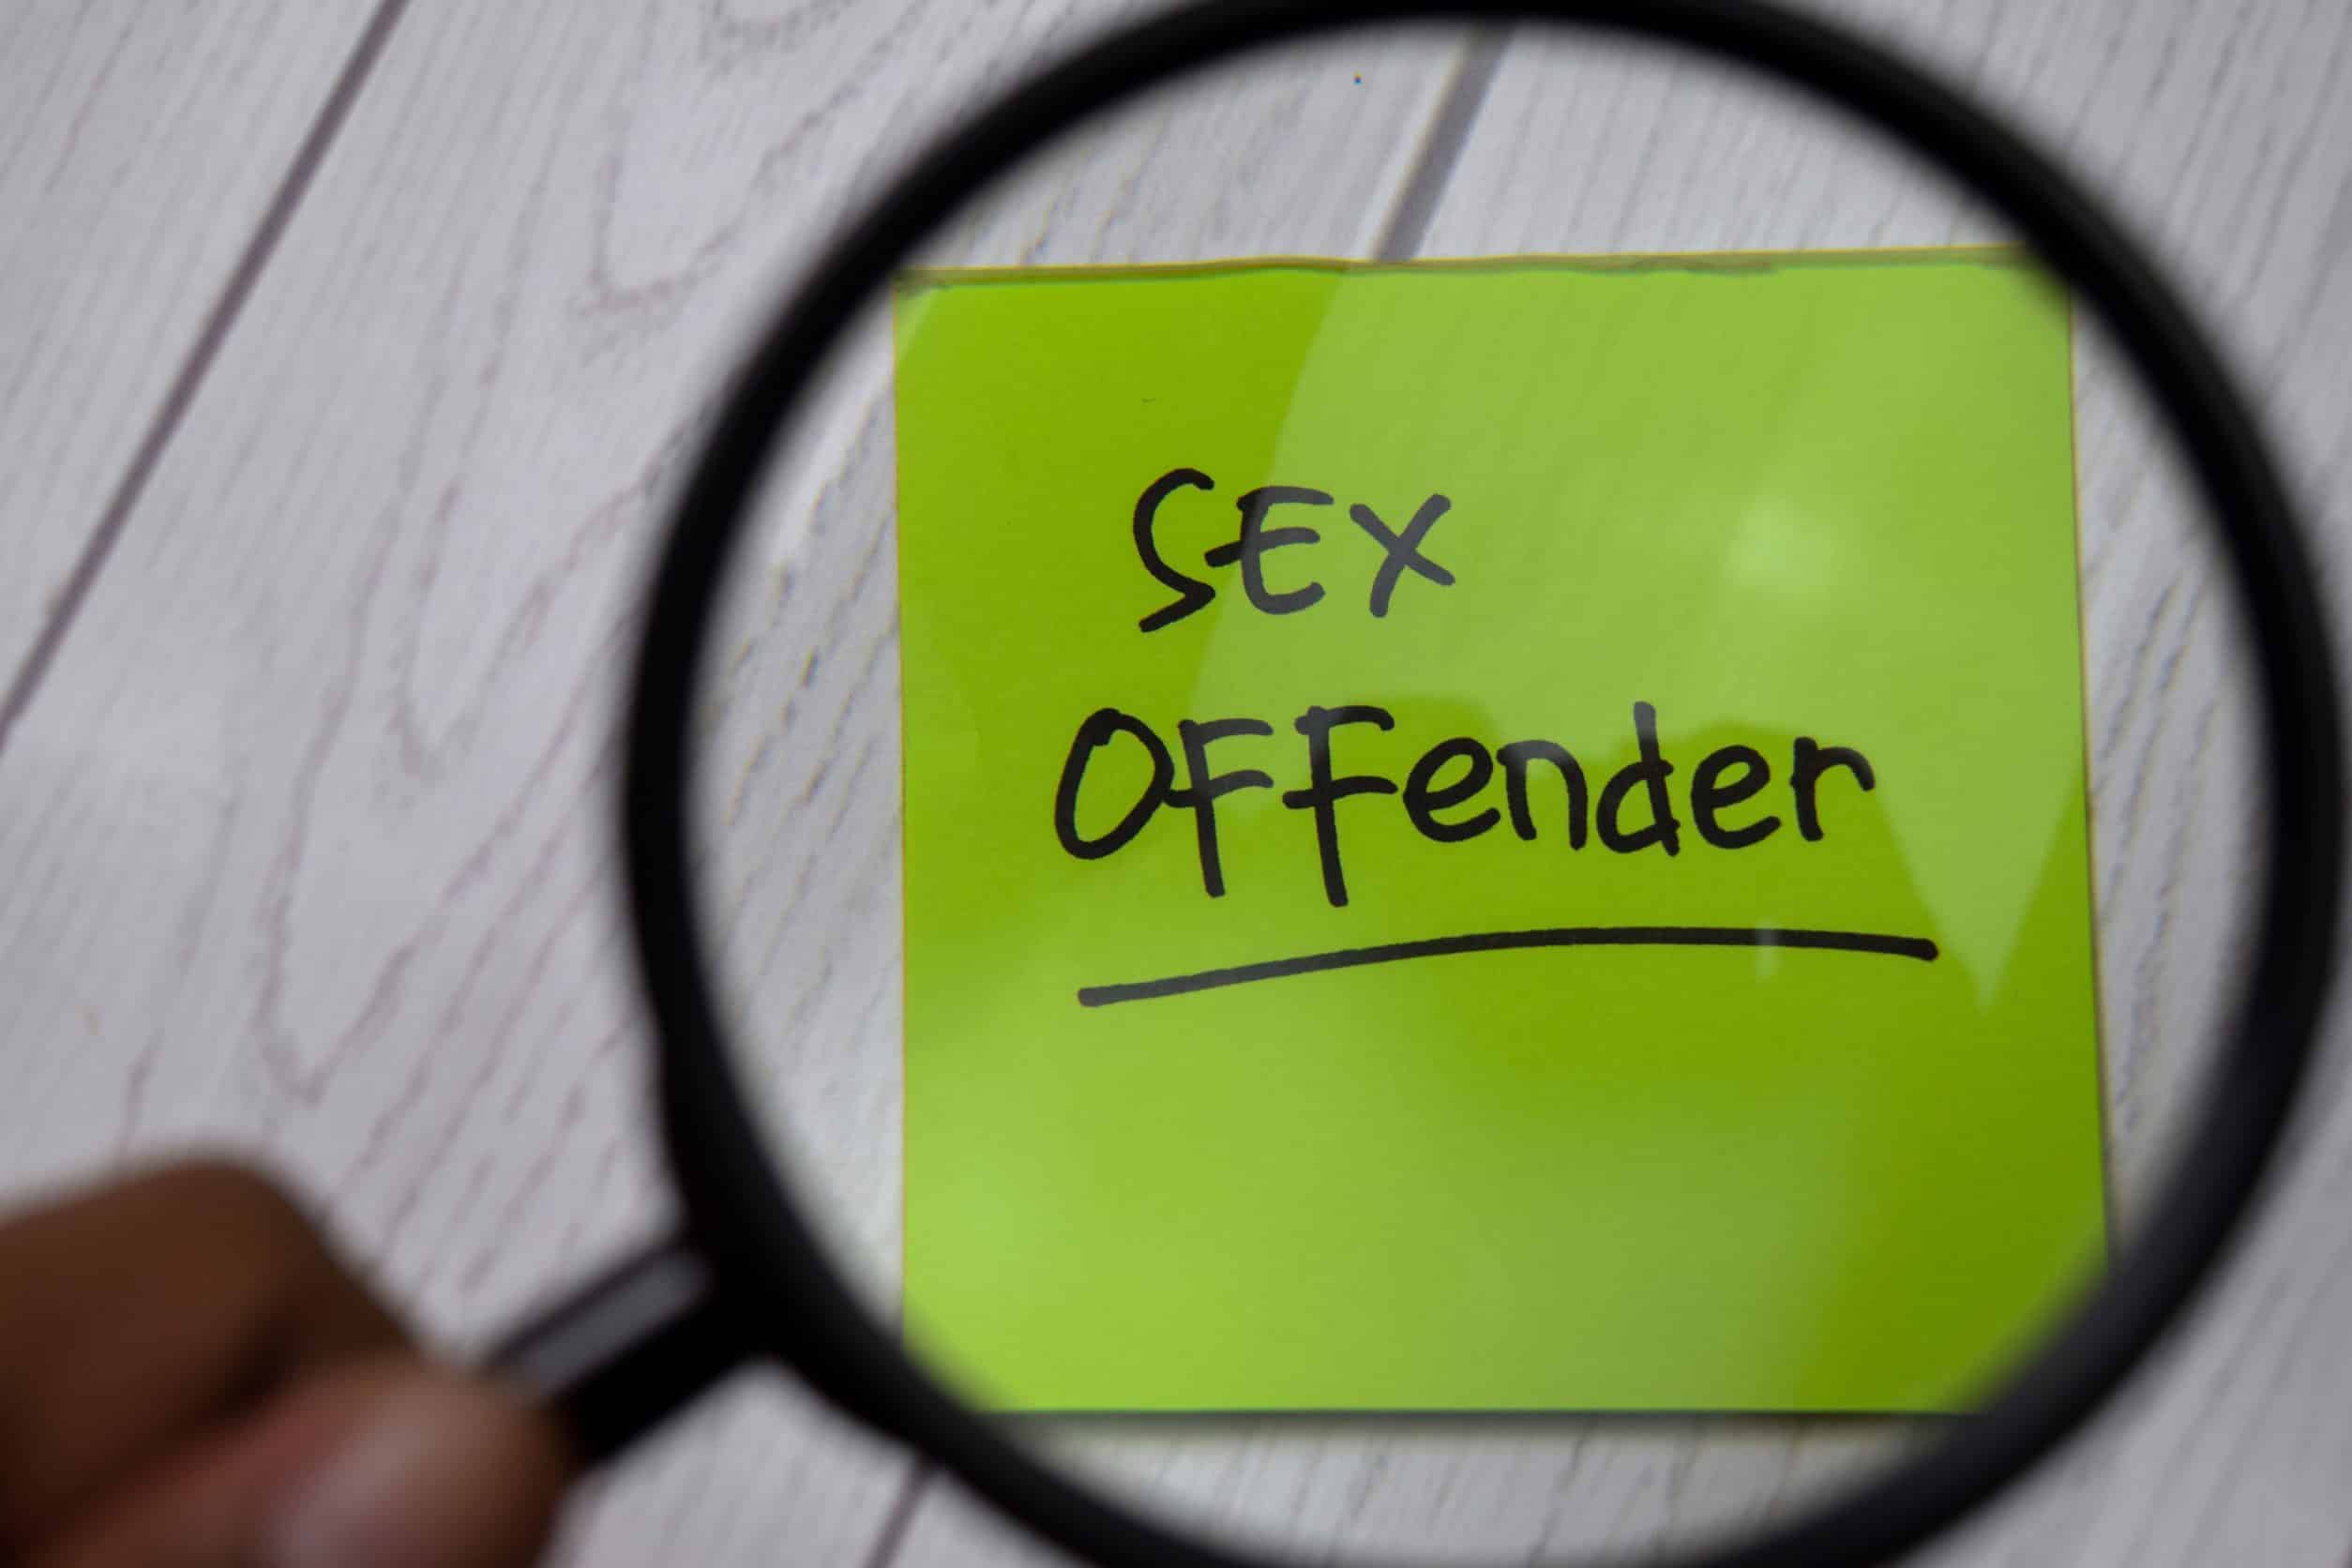 IL Sex Offender? You Could Have Your Accomplishments Erased